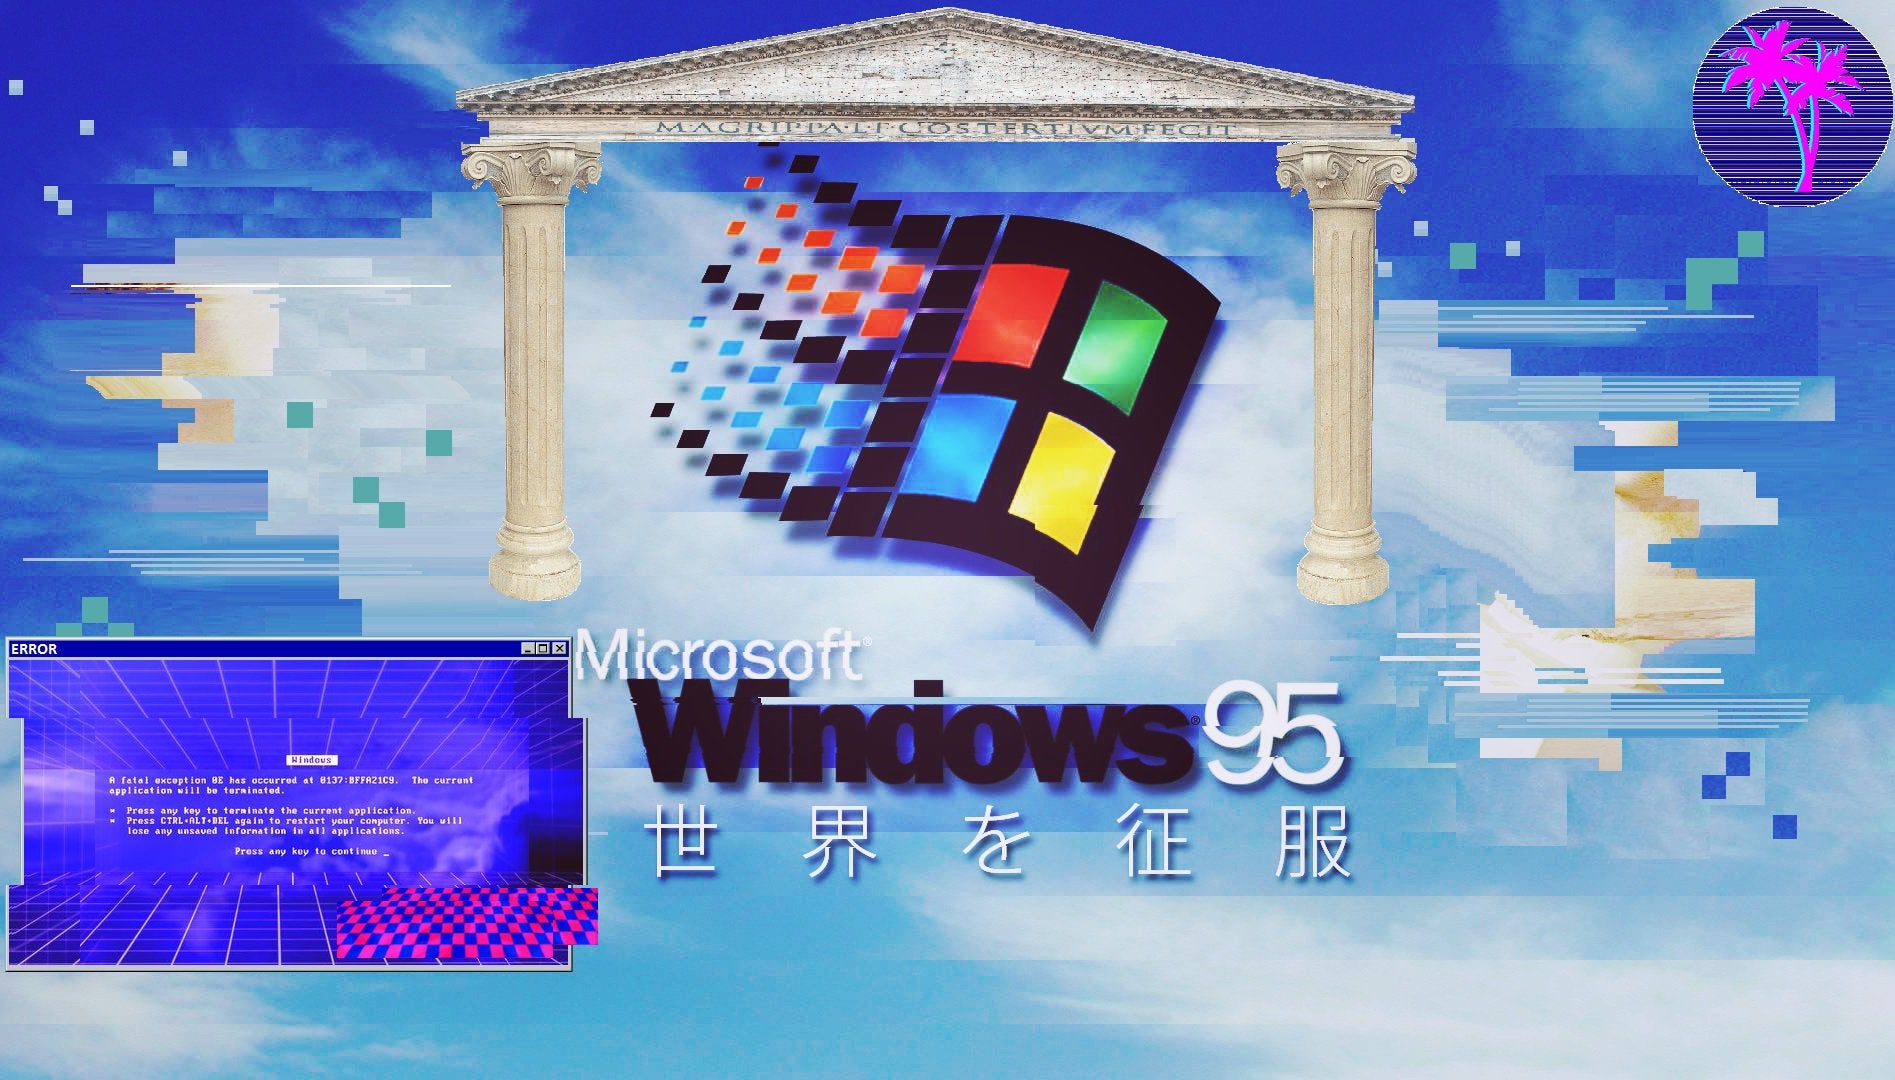 Enhanced HD Wallpapers: Classic Windows 95 to Windows Me Backgrounds  Upscaled for Desktop & Mobile Devices | neural.love blog about AI stuff